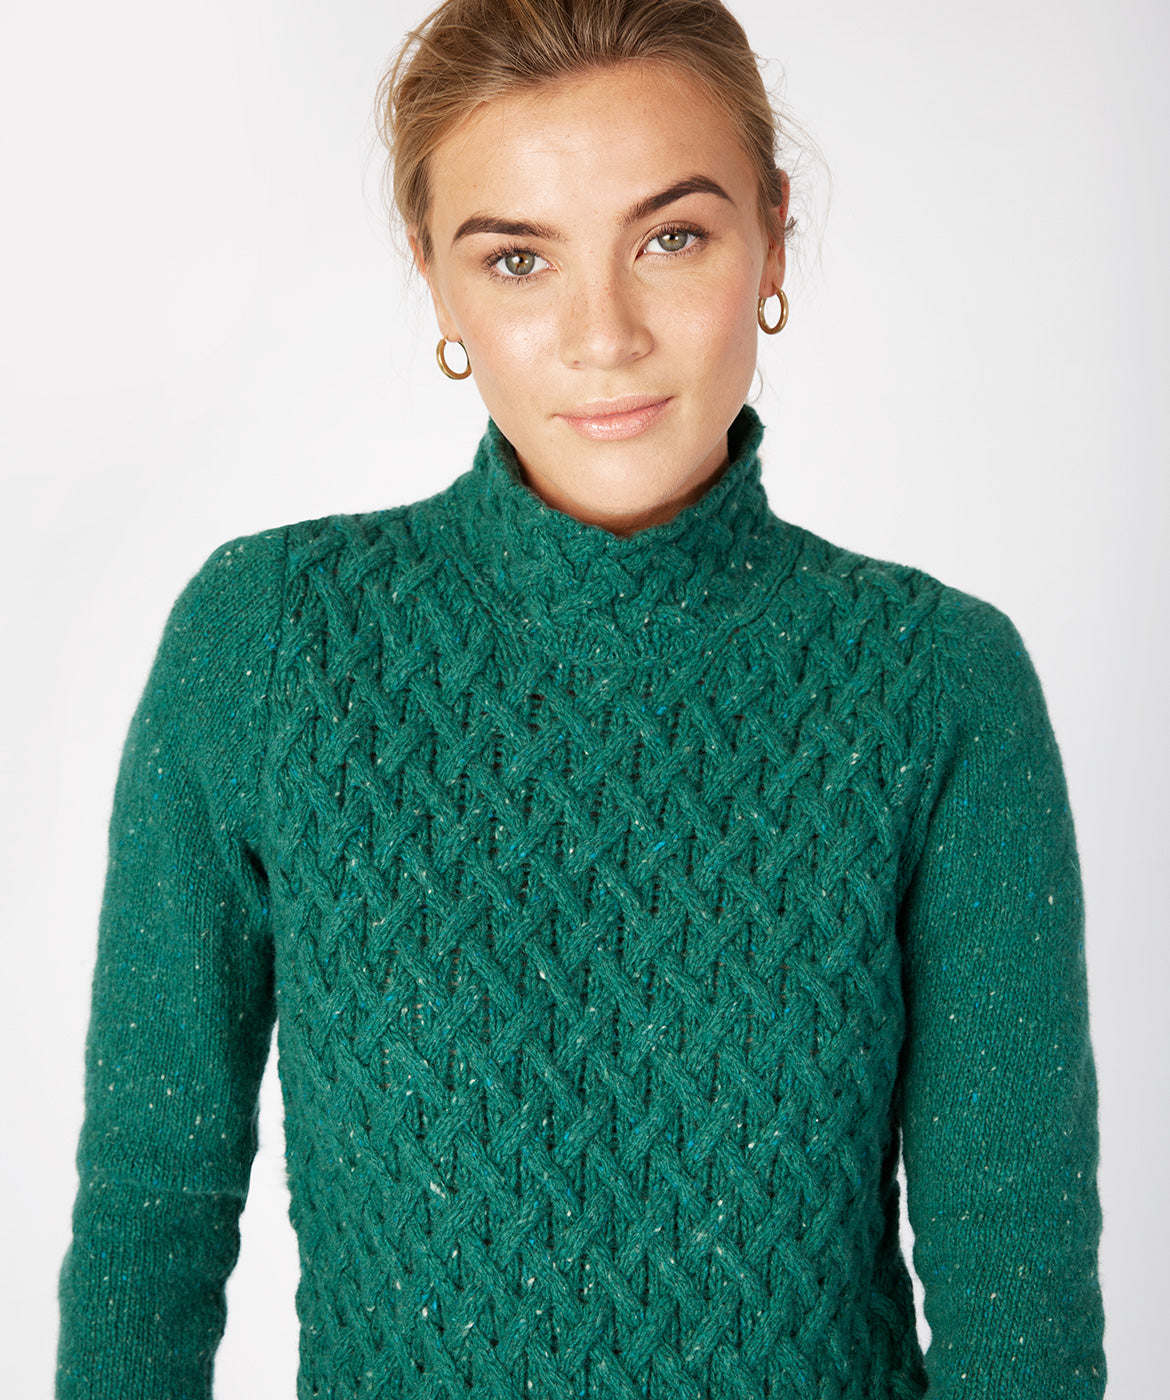 Teal Womens Sweater 